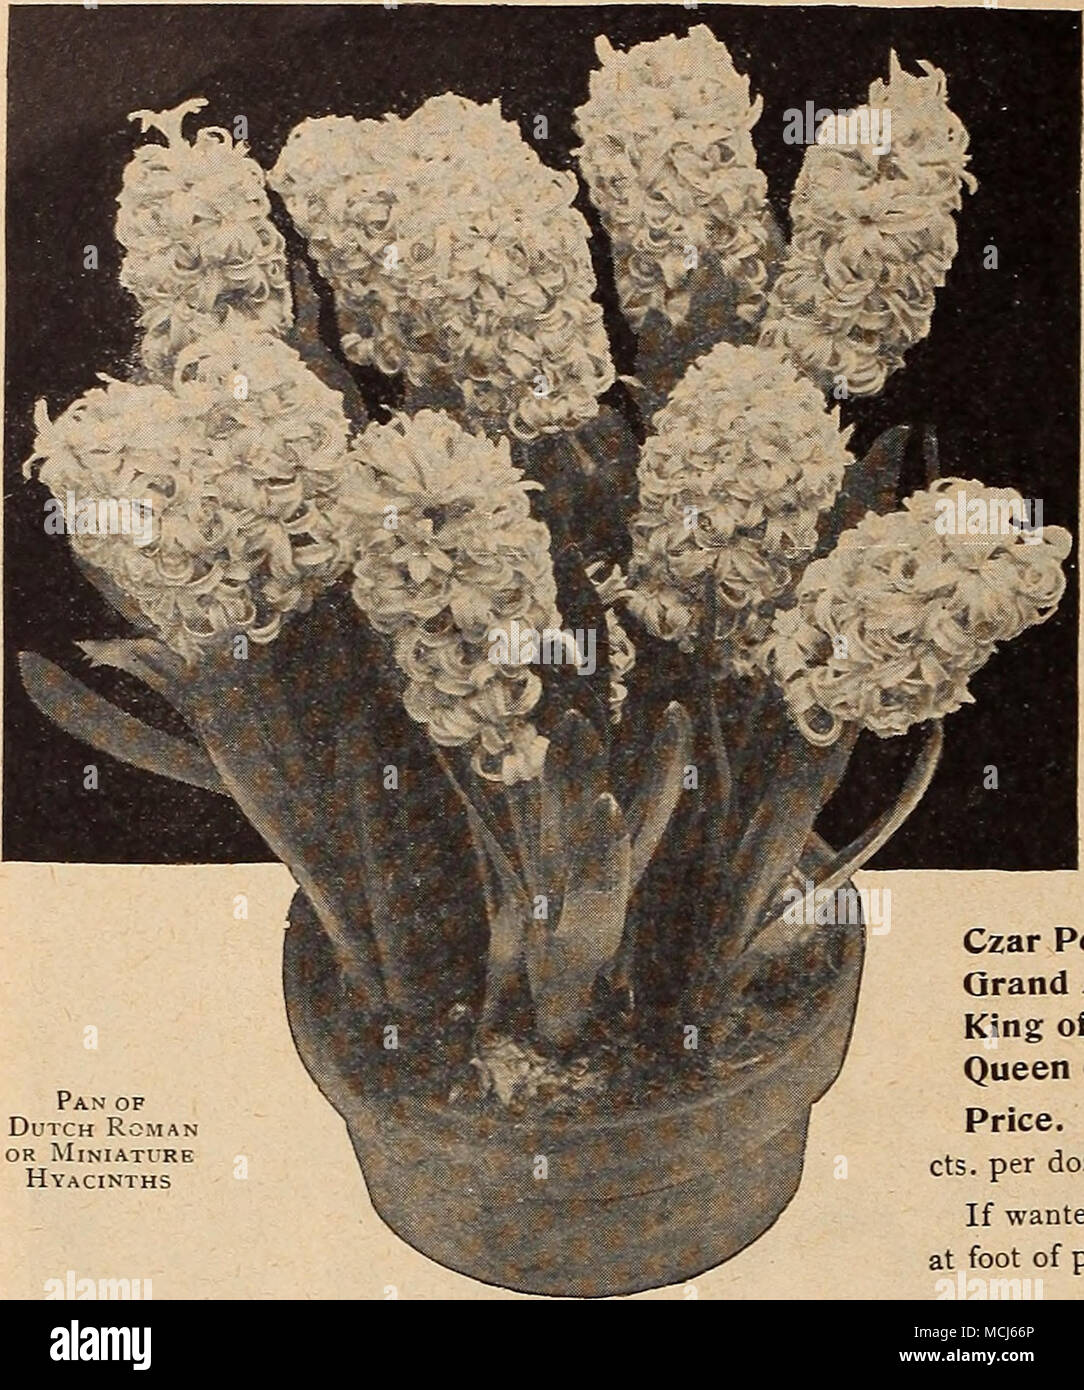 . Pan op Dutch Roman OR Miniature Hyacinths OUTCH ROMAN OR MINIATURE HYACINTHS These are small bulbs of the single-flowering Dutch Hyacinths, and quite distinct from the French Ro- mans offered below, and excellent for growing in pans, pots or boxes, in soil or prepared fibre, bloom- ing early and freely. They may be planted close together in the pans, pots or boxes, or in beds in the open ground, with charming effect. The bulbs we offer average 5 inches in circumference, and must not be confounded with smaller unnamed sorts. Gertrude. Deep rose. Gigantea. Soft blush or shell pink. Moreno. Bea Stock Photo